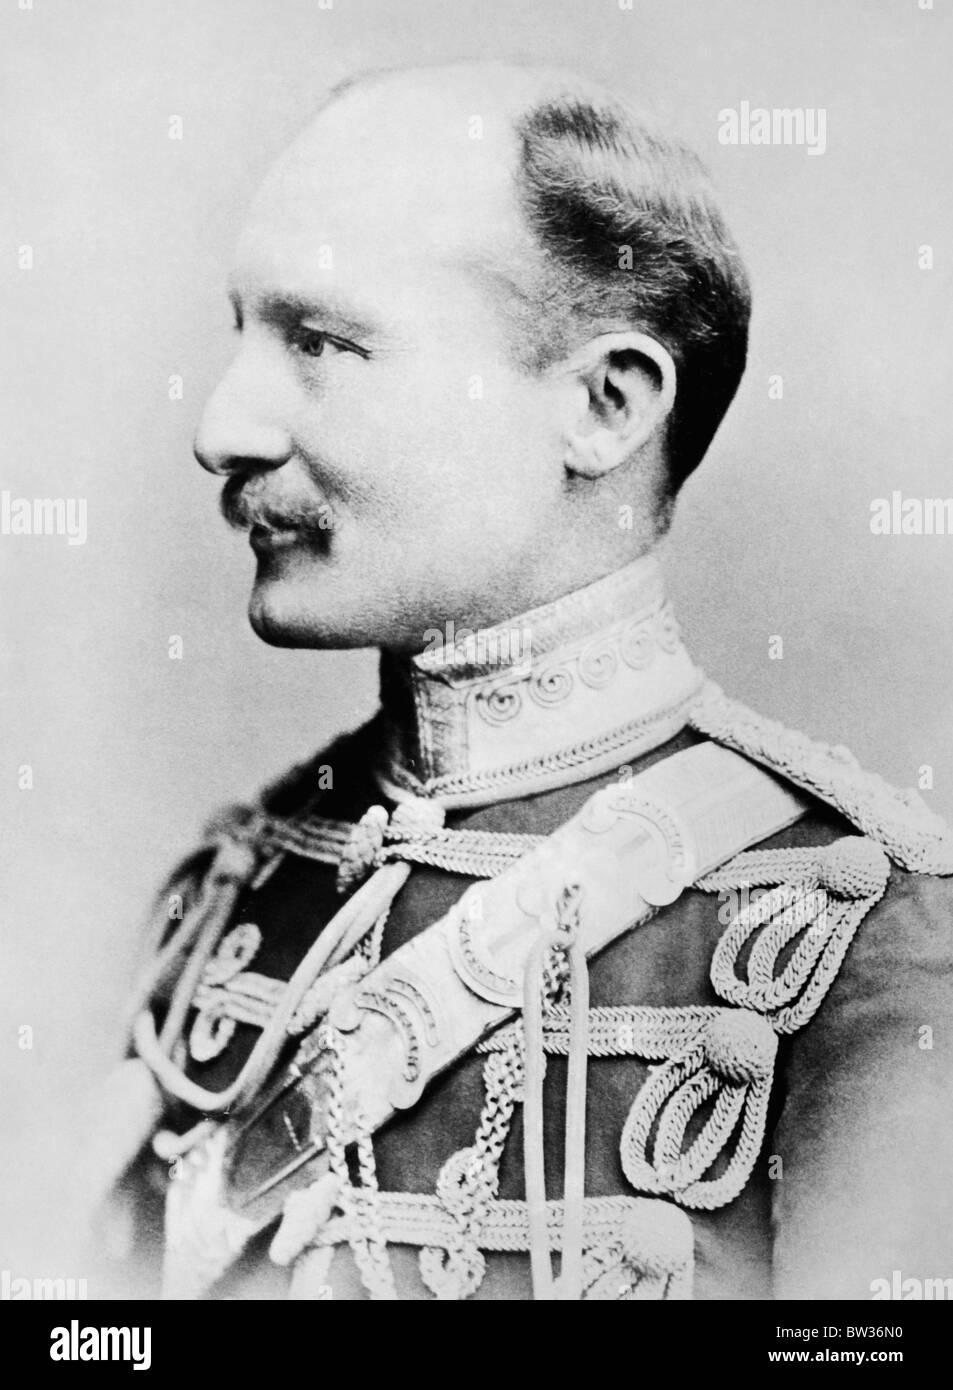 Portrait photo circa 1900 of General Robert Baden-Powell (1857 - 1941) - British soldier and founder of the Scout Movement. Stock Photo